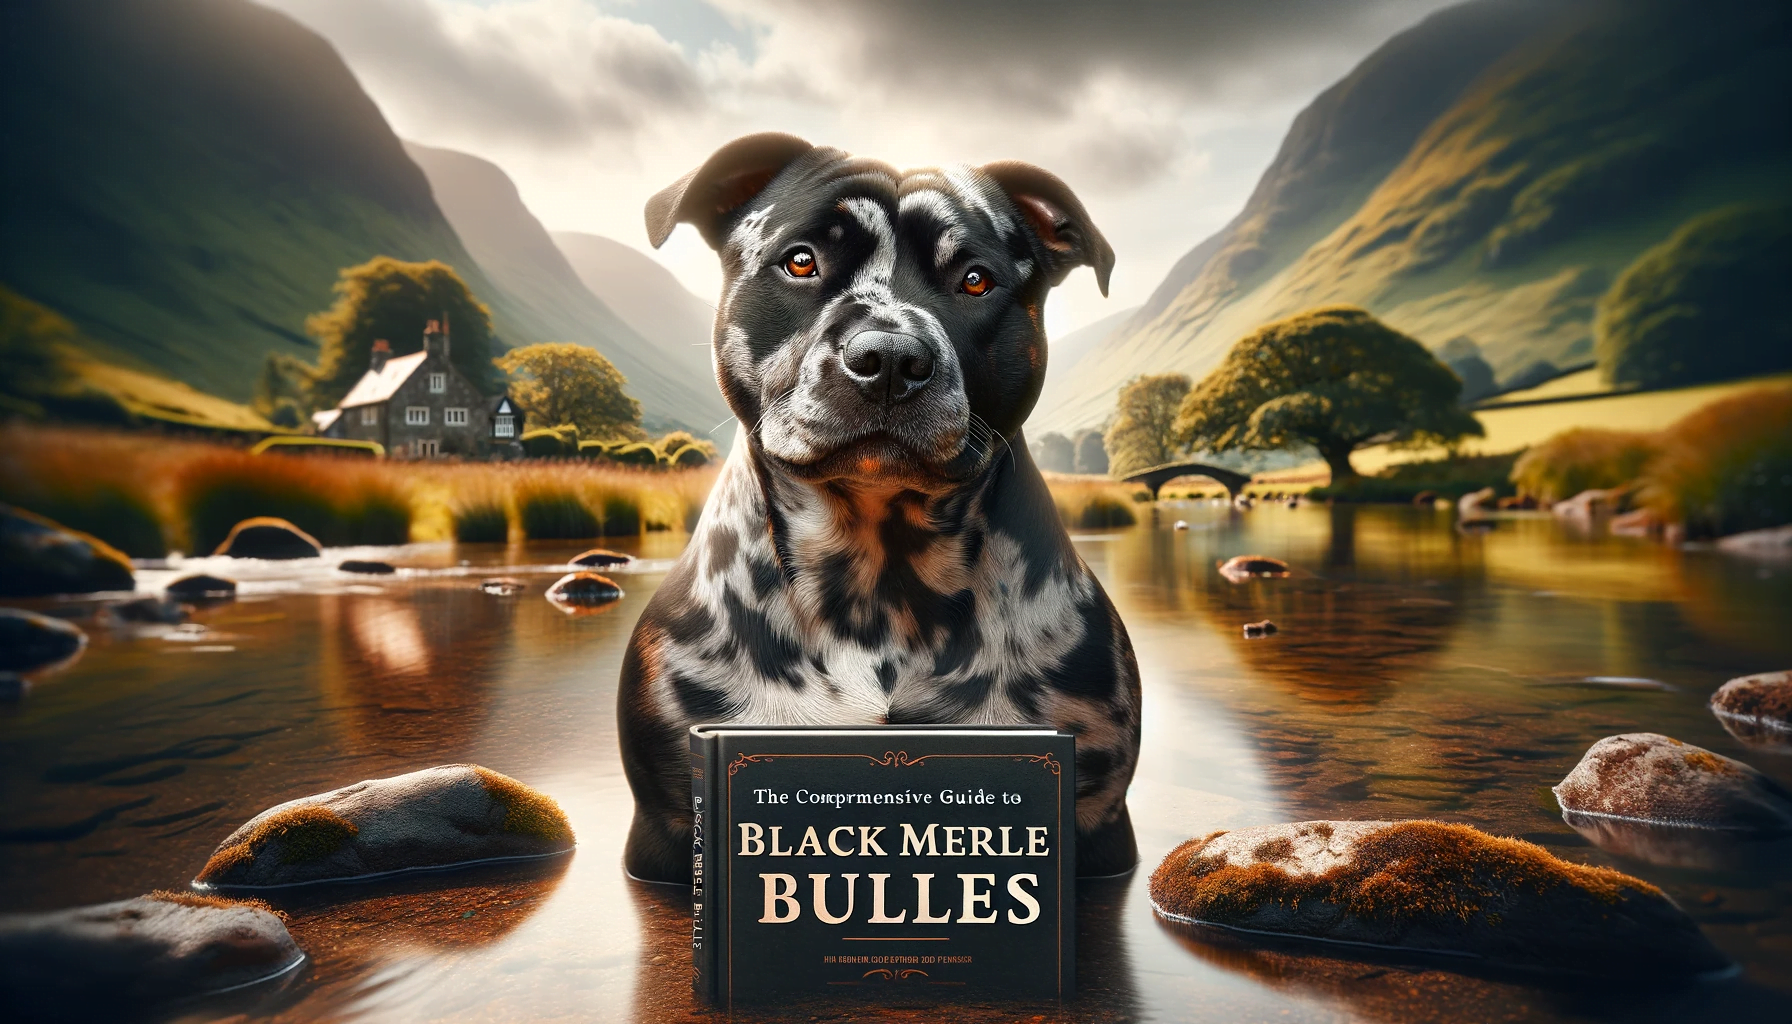 A captivating Black Merle Bully in a natural setting with the title "The Comprehensive Guide to Black Merle Bullies.